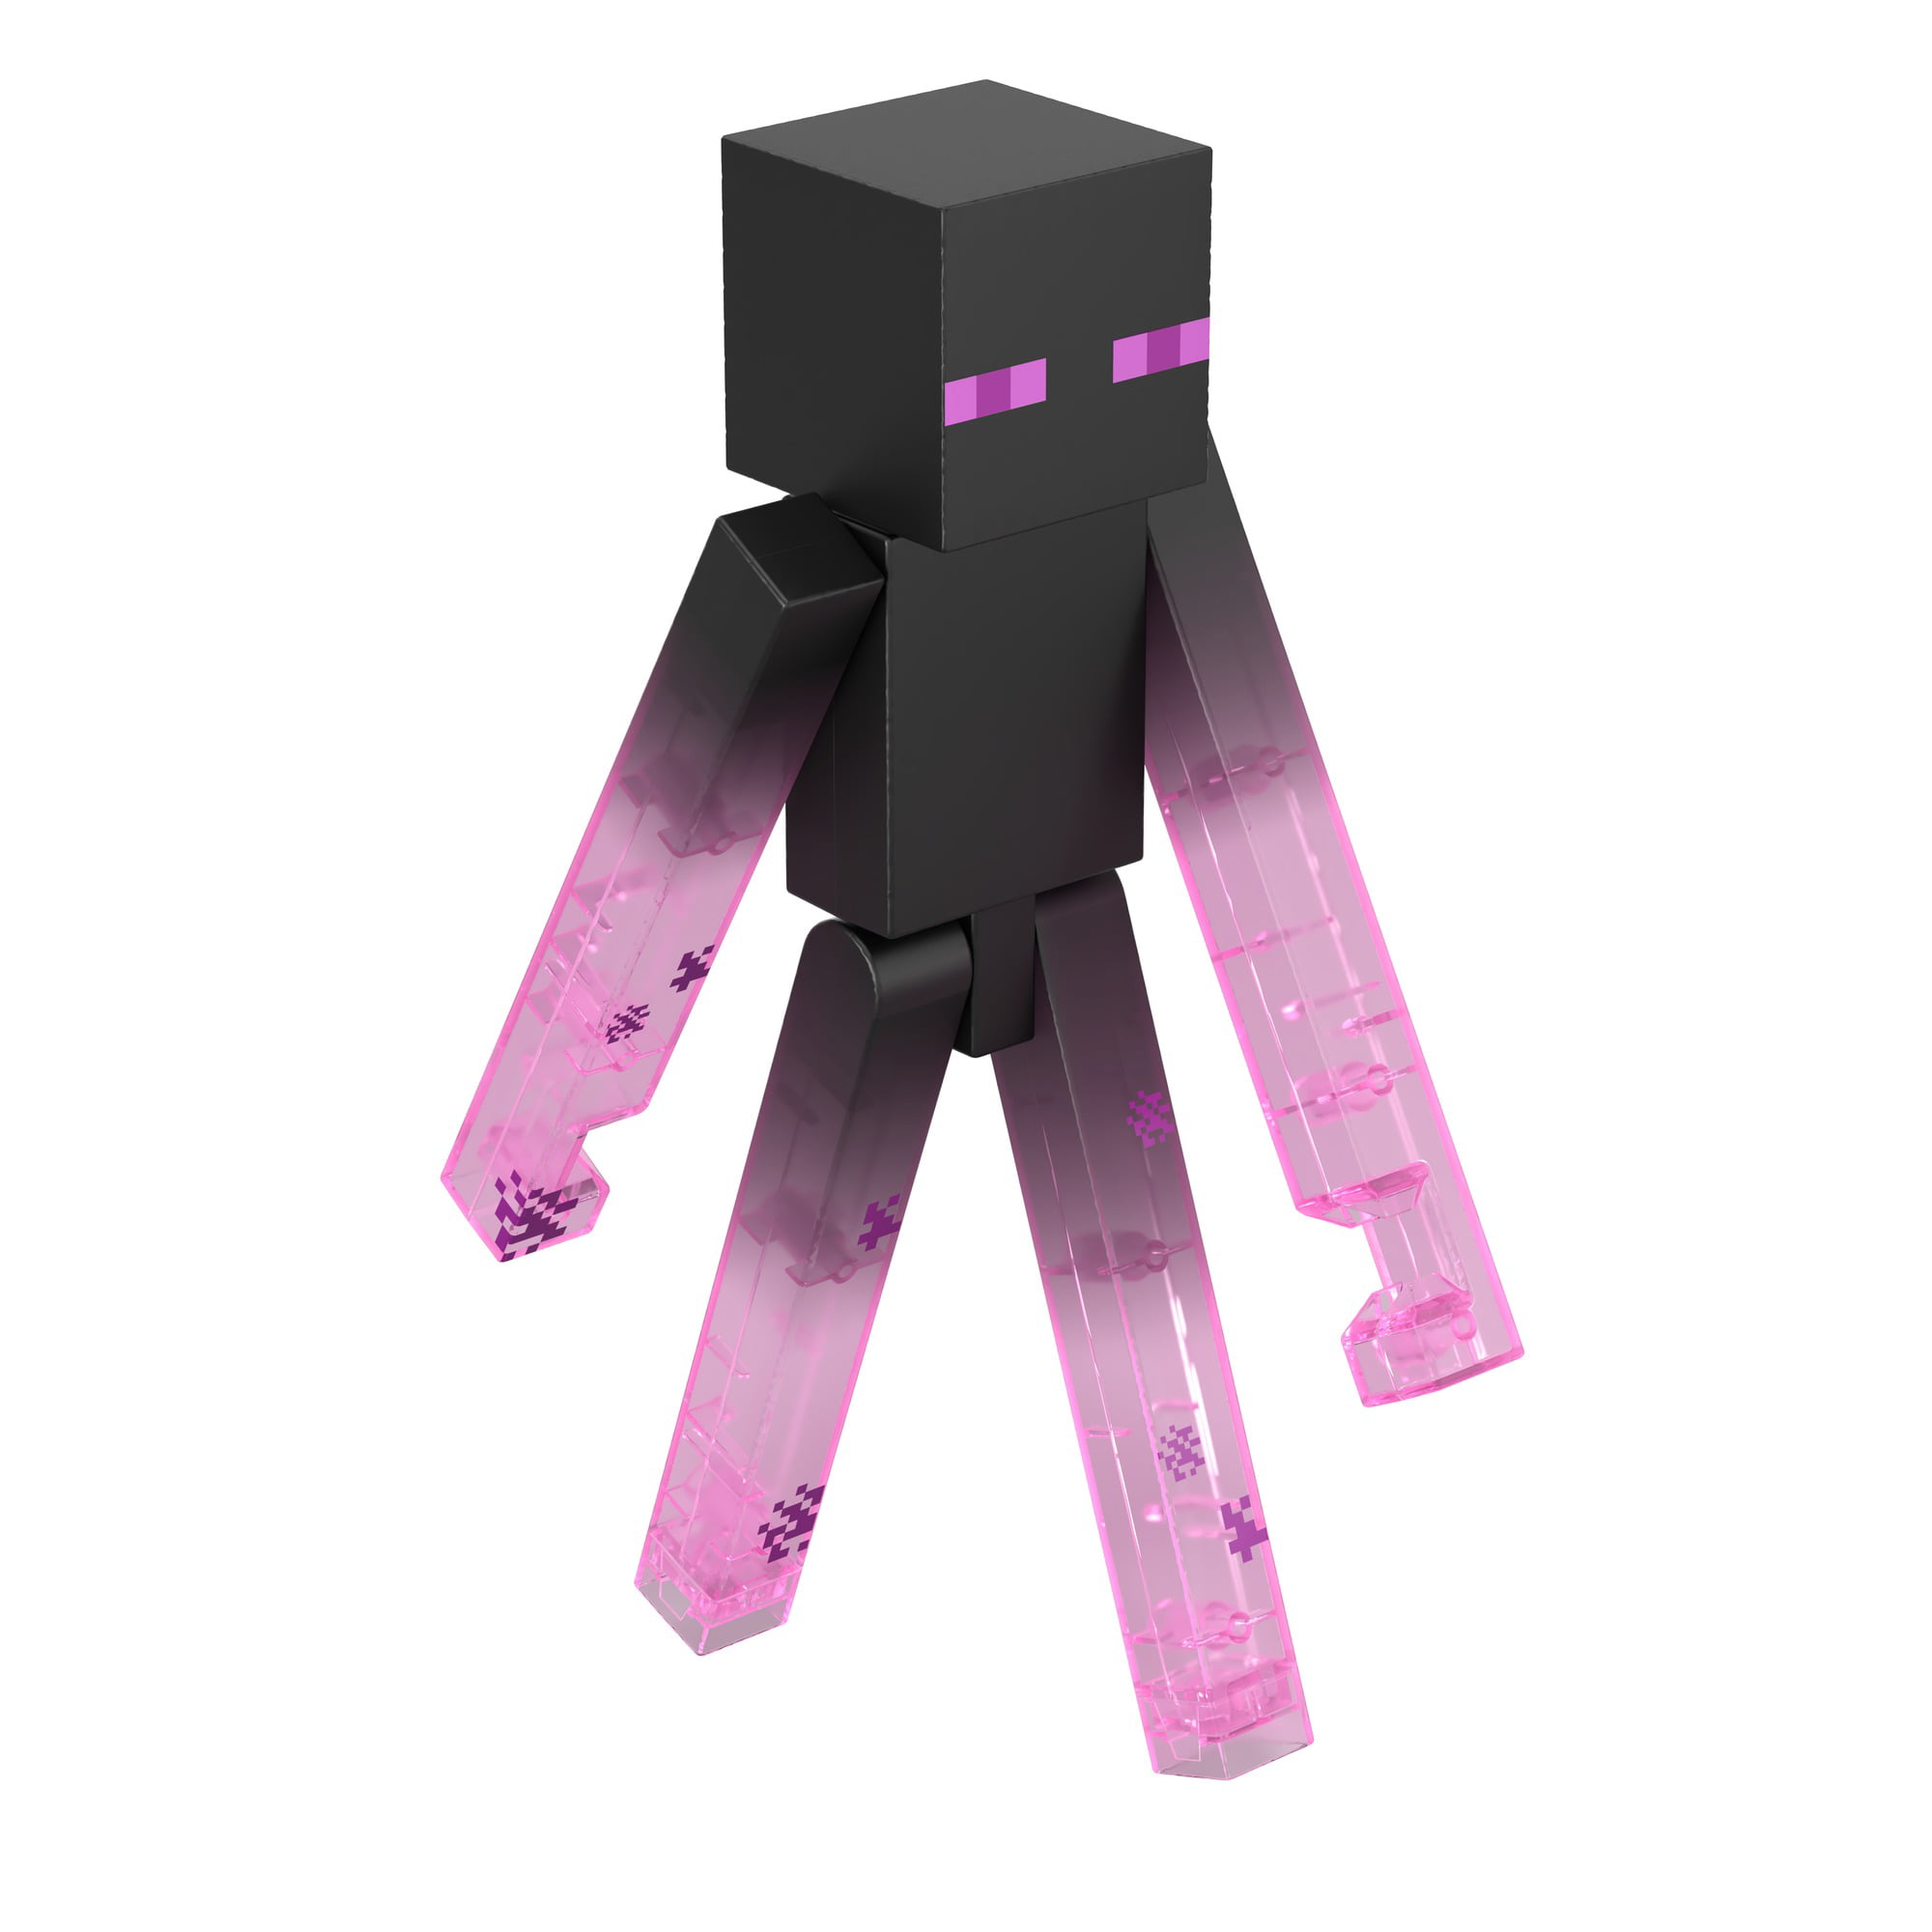 Minecraft Teleporting Enderman Large Figure Walmart Com Walmart Com - teleporting to earth to get pets hair and dress up roblox